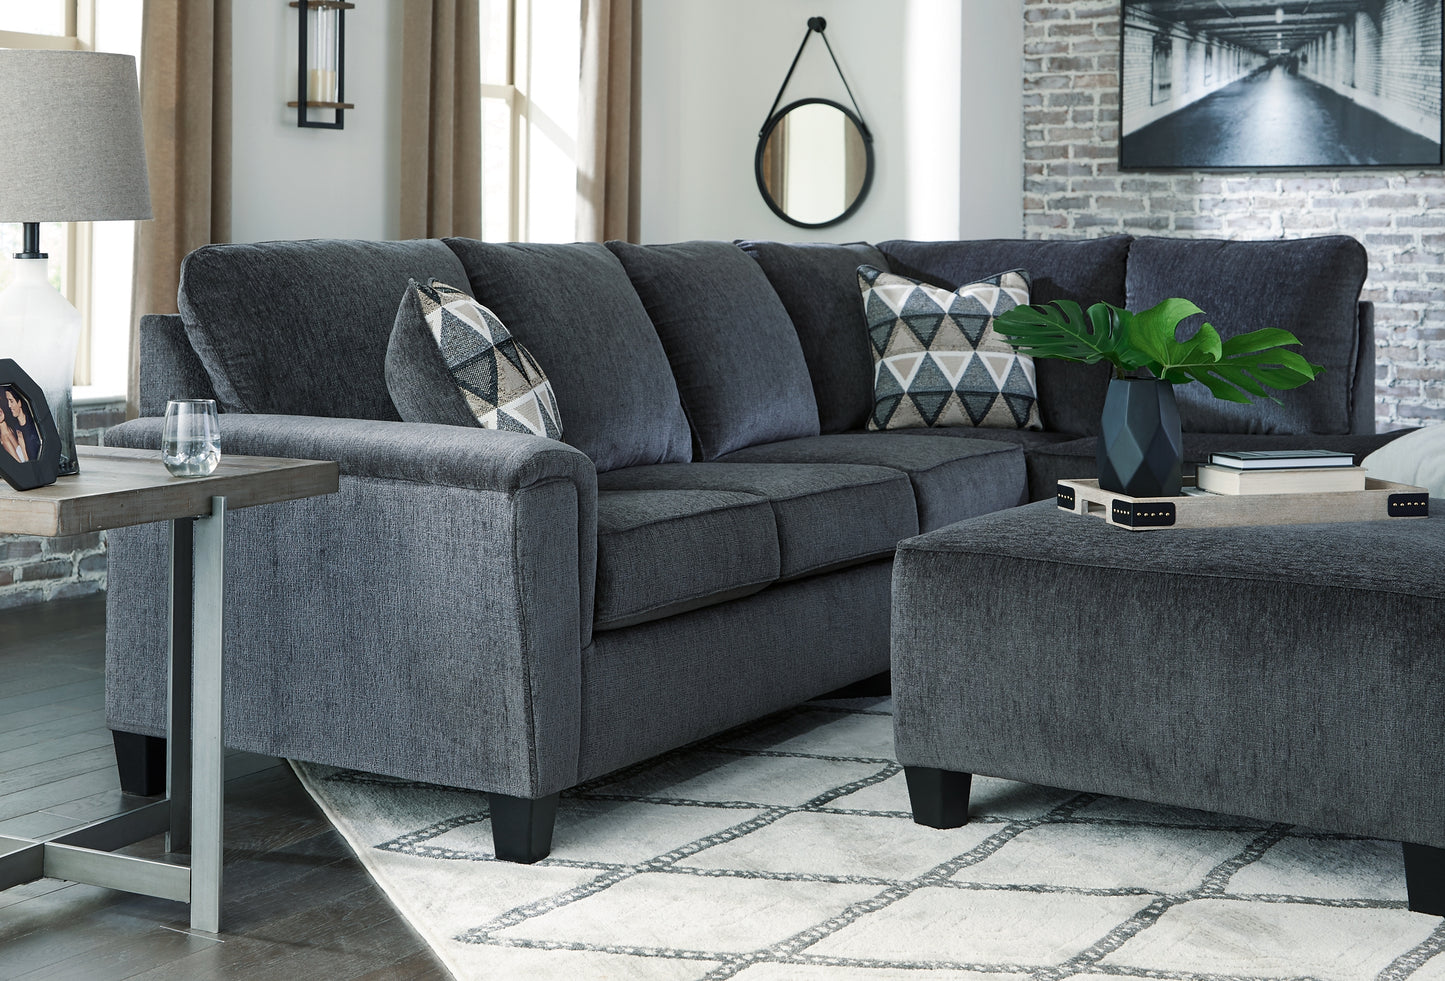 Abinger 2-Piece Sectional with Chaise Wilson Furniture (OH)  in Bridgeport, Ohio. Serving Bridgeport, Yorkville, Bellaire, & Avondale